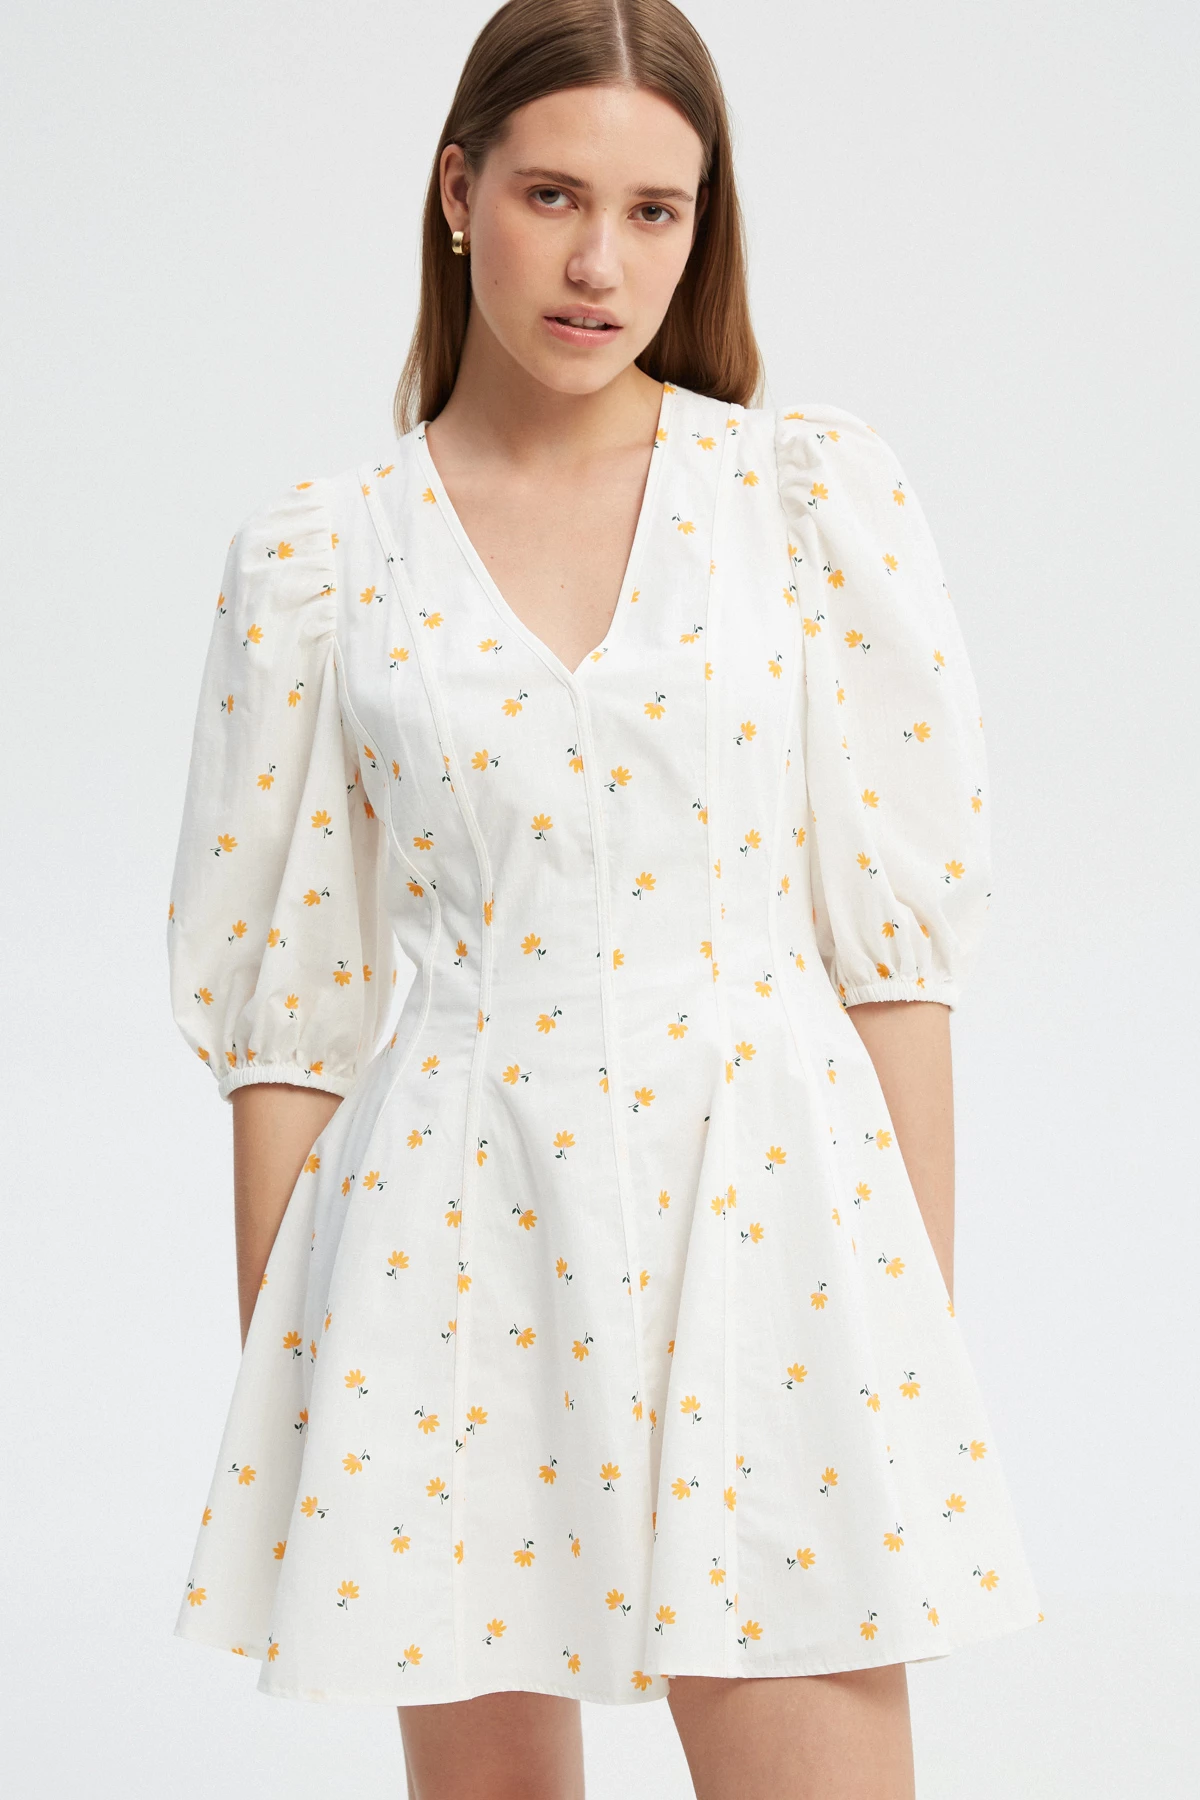 White short cotton dress with yellow flowers print, photo 3